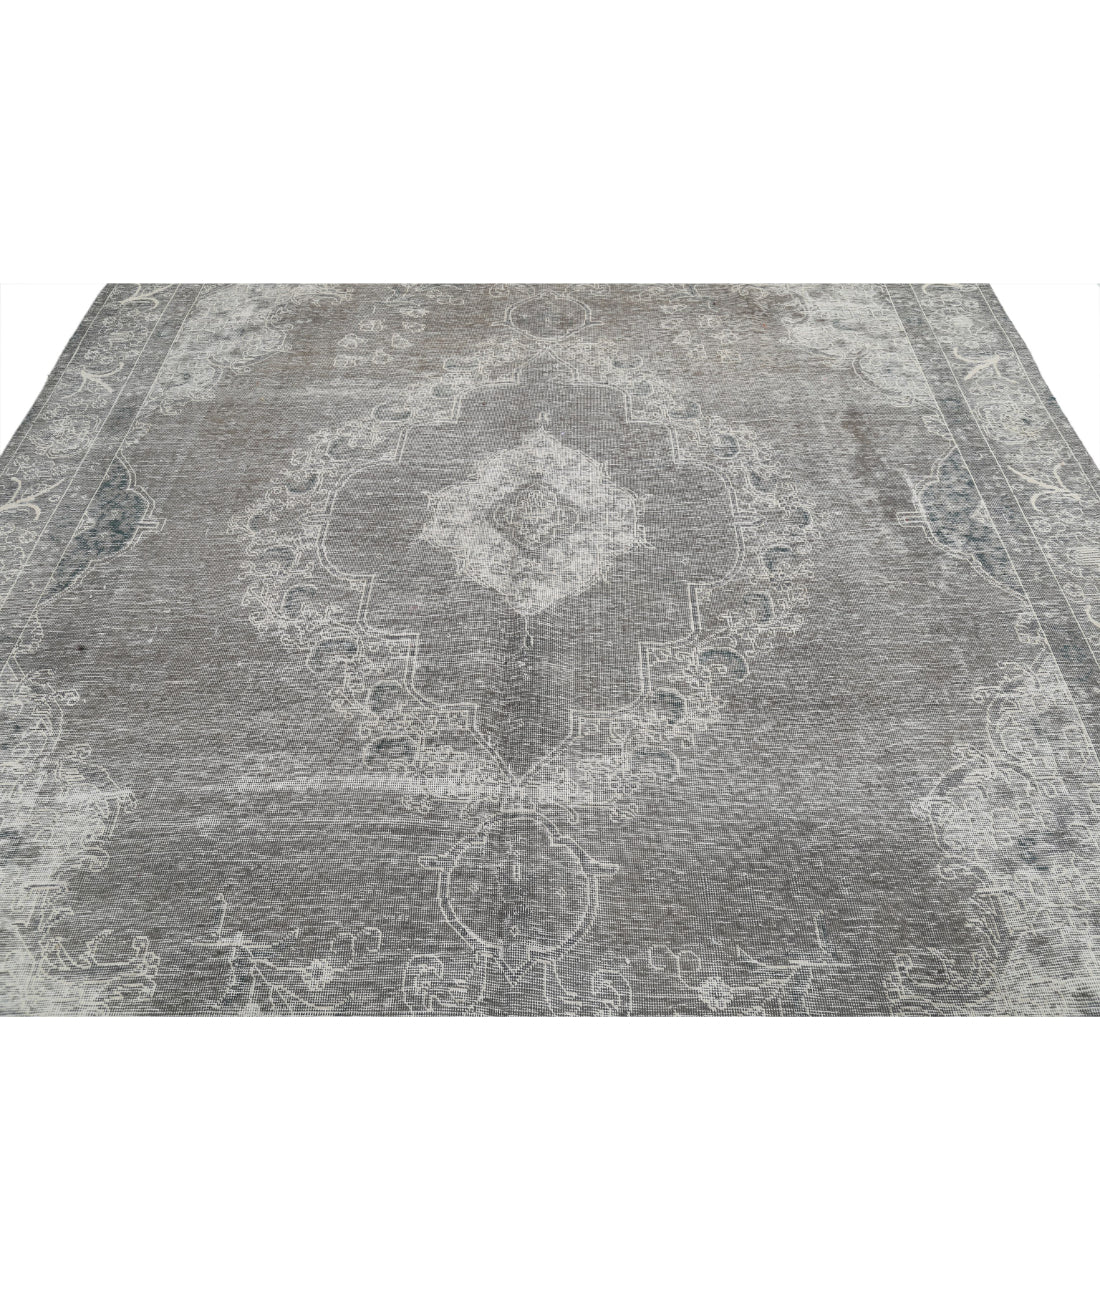 Hand Knotted Vintage Persian Tabriz Wool Rug - 8'5'' x 12'3'' 8'5'' x 12'3'' (253 X 368) / Grey / Ivory